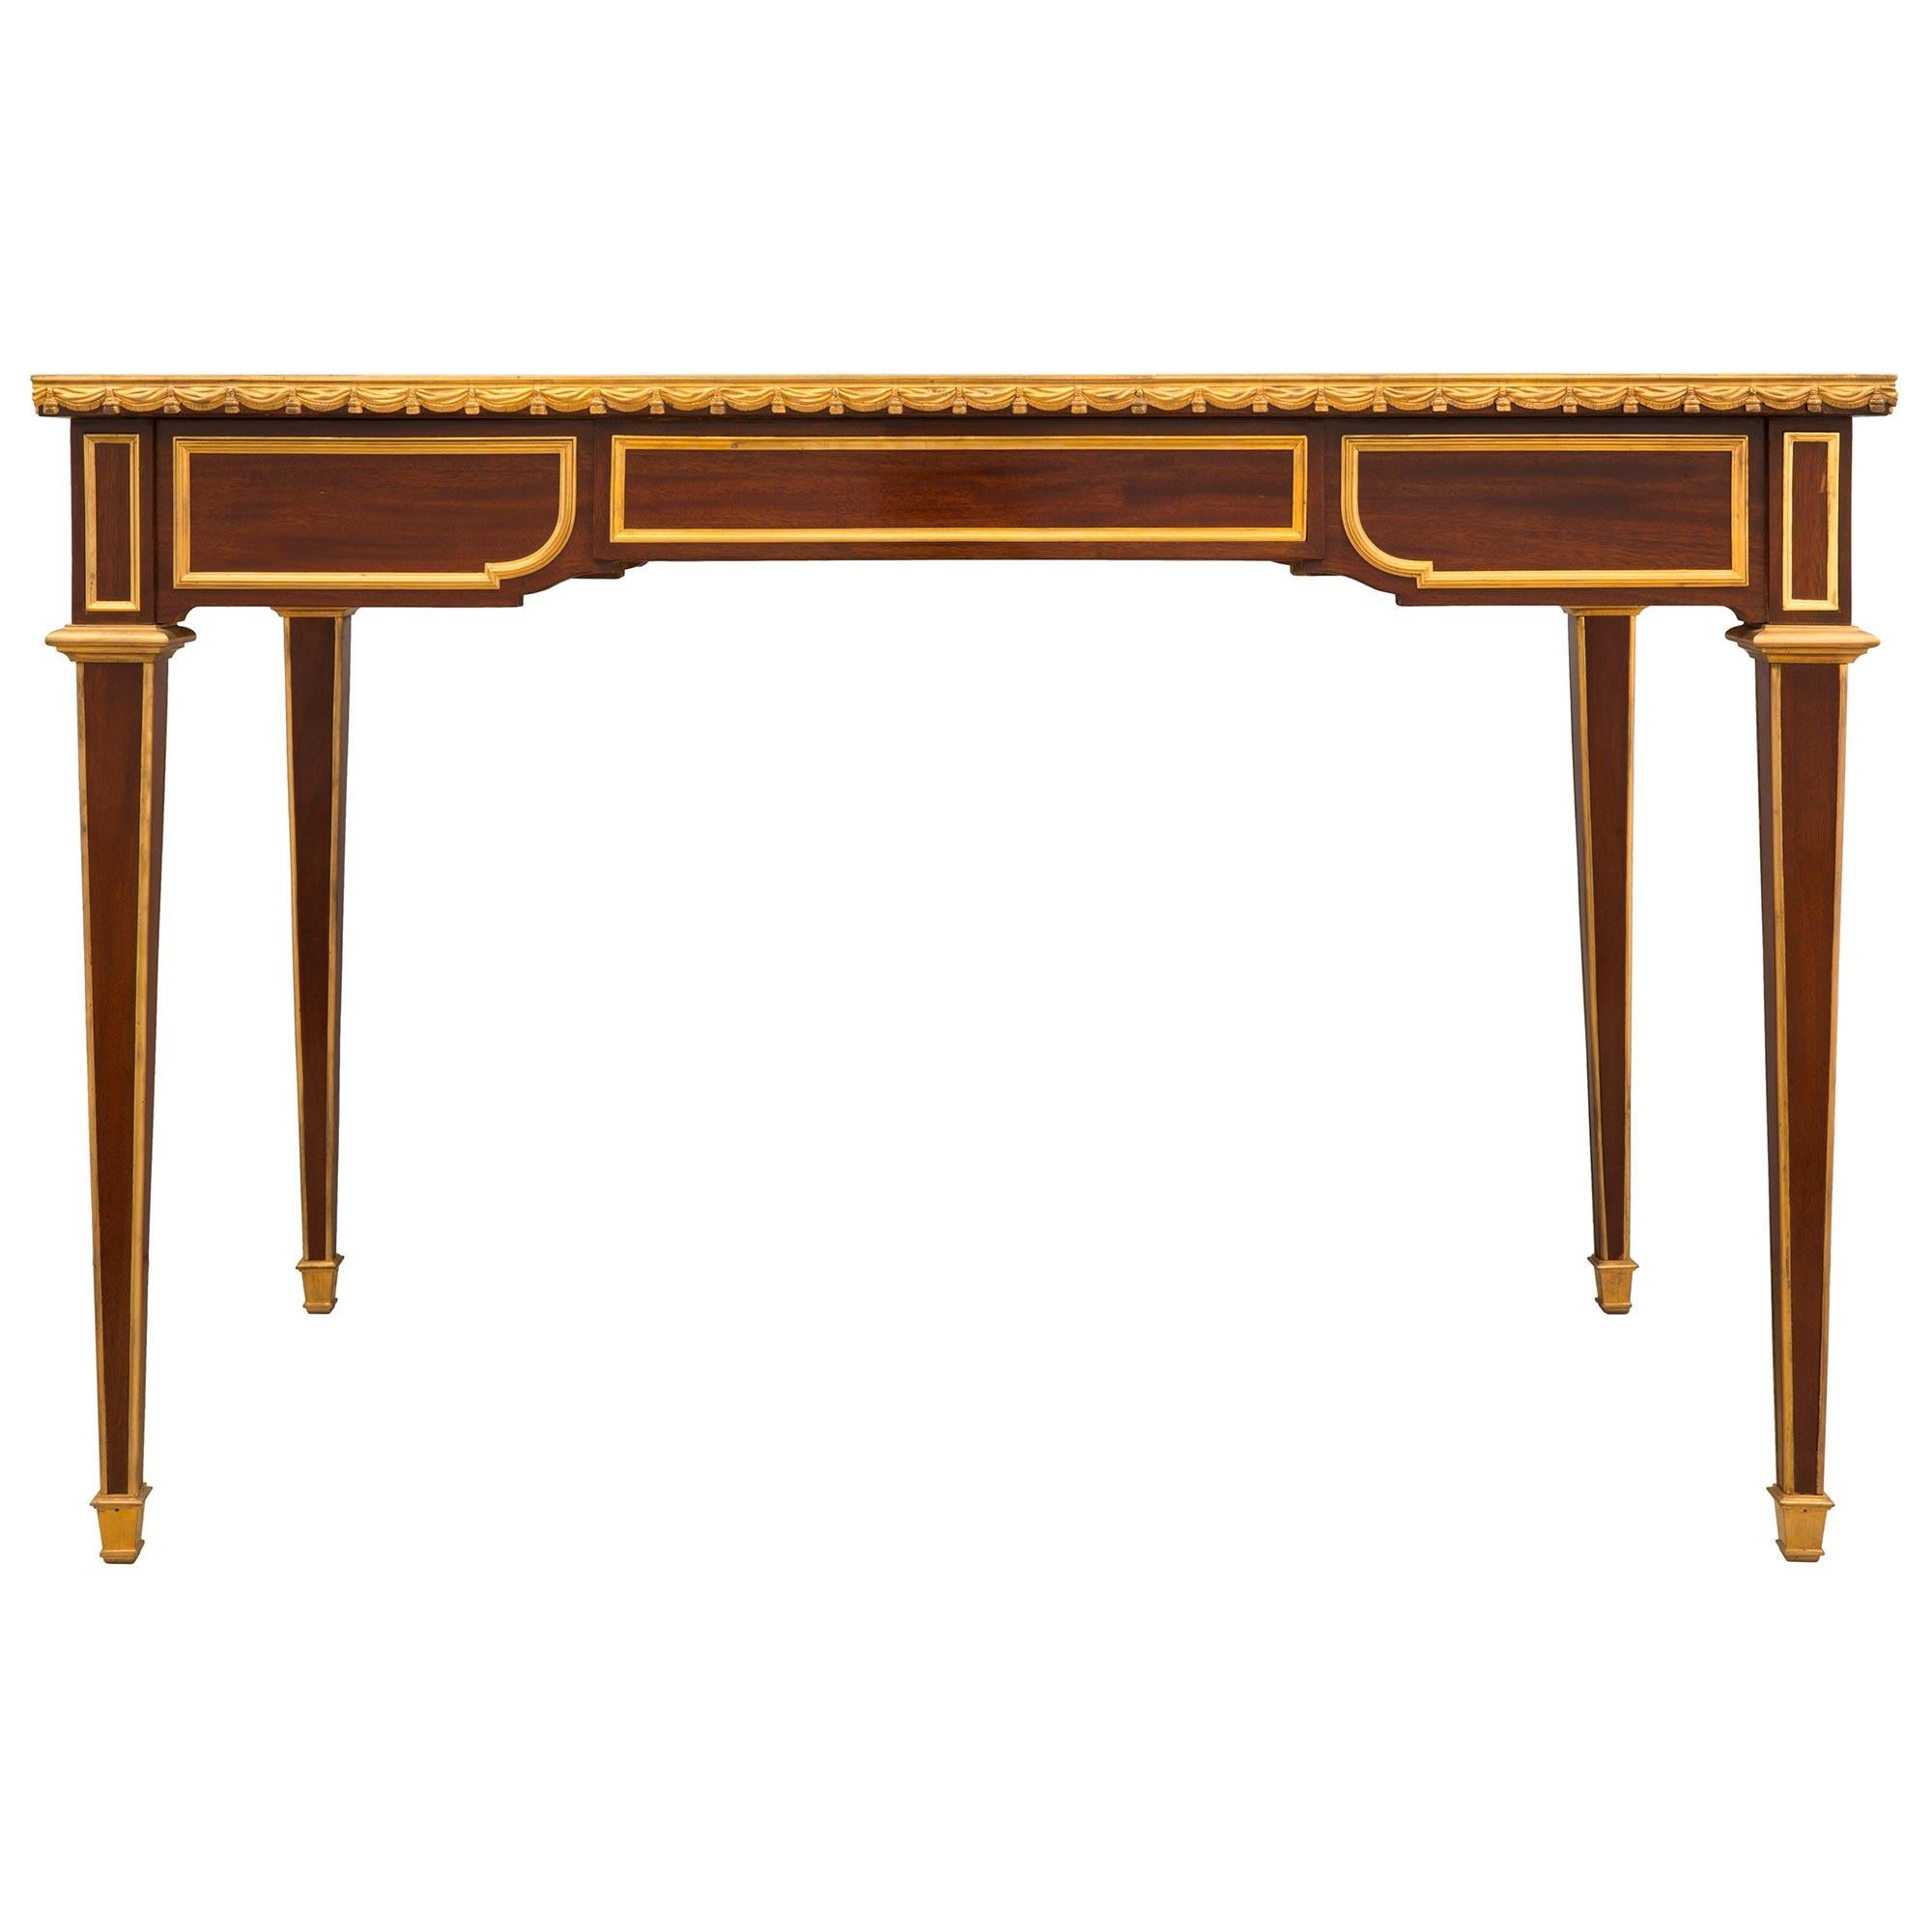 French 19th Century Louis XVI Style Mahogany and Ormolu Desk For Sale 3